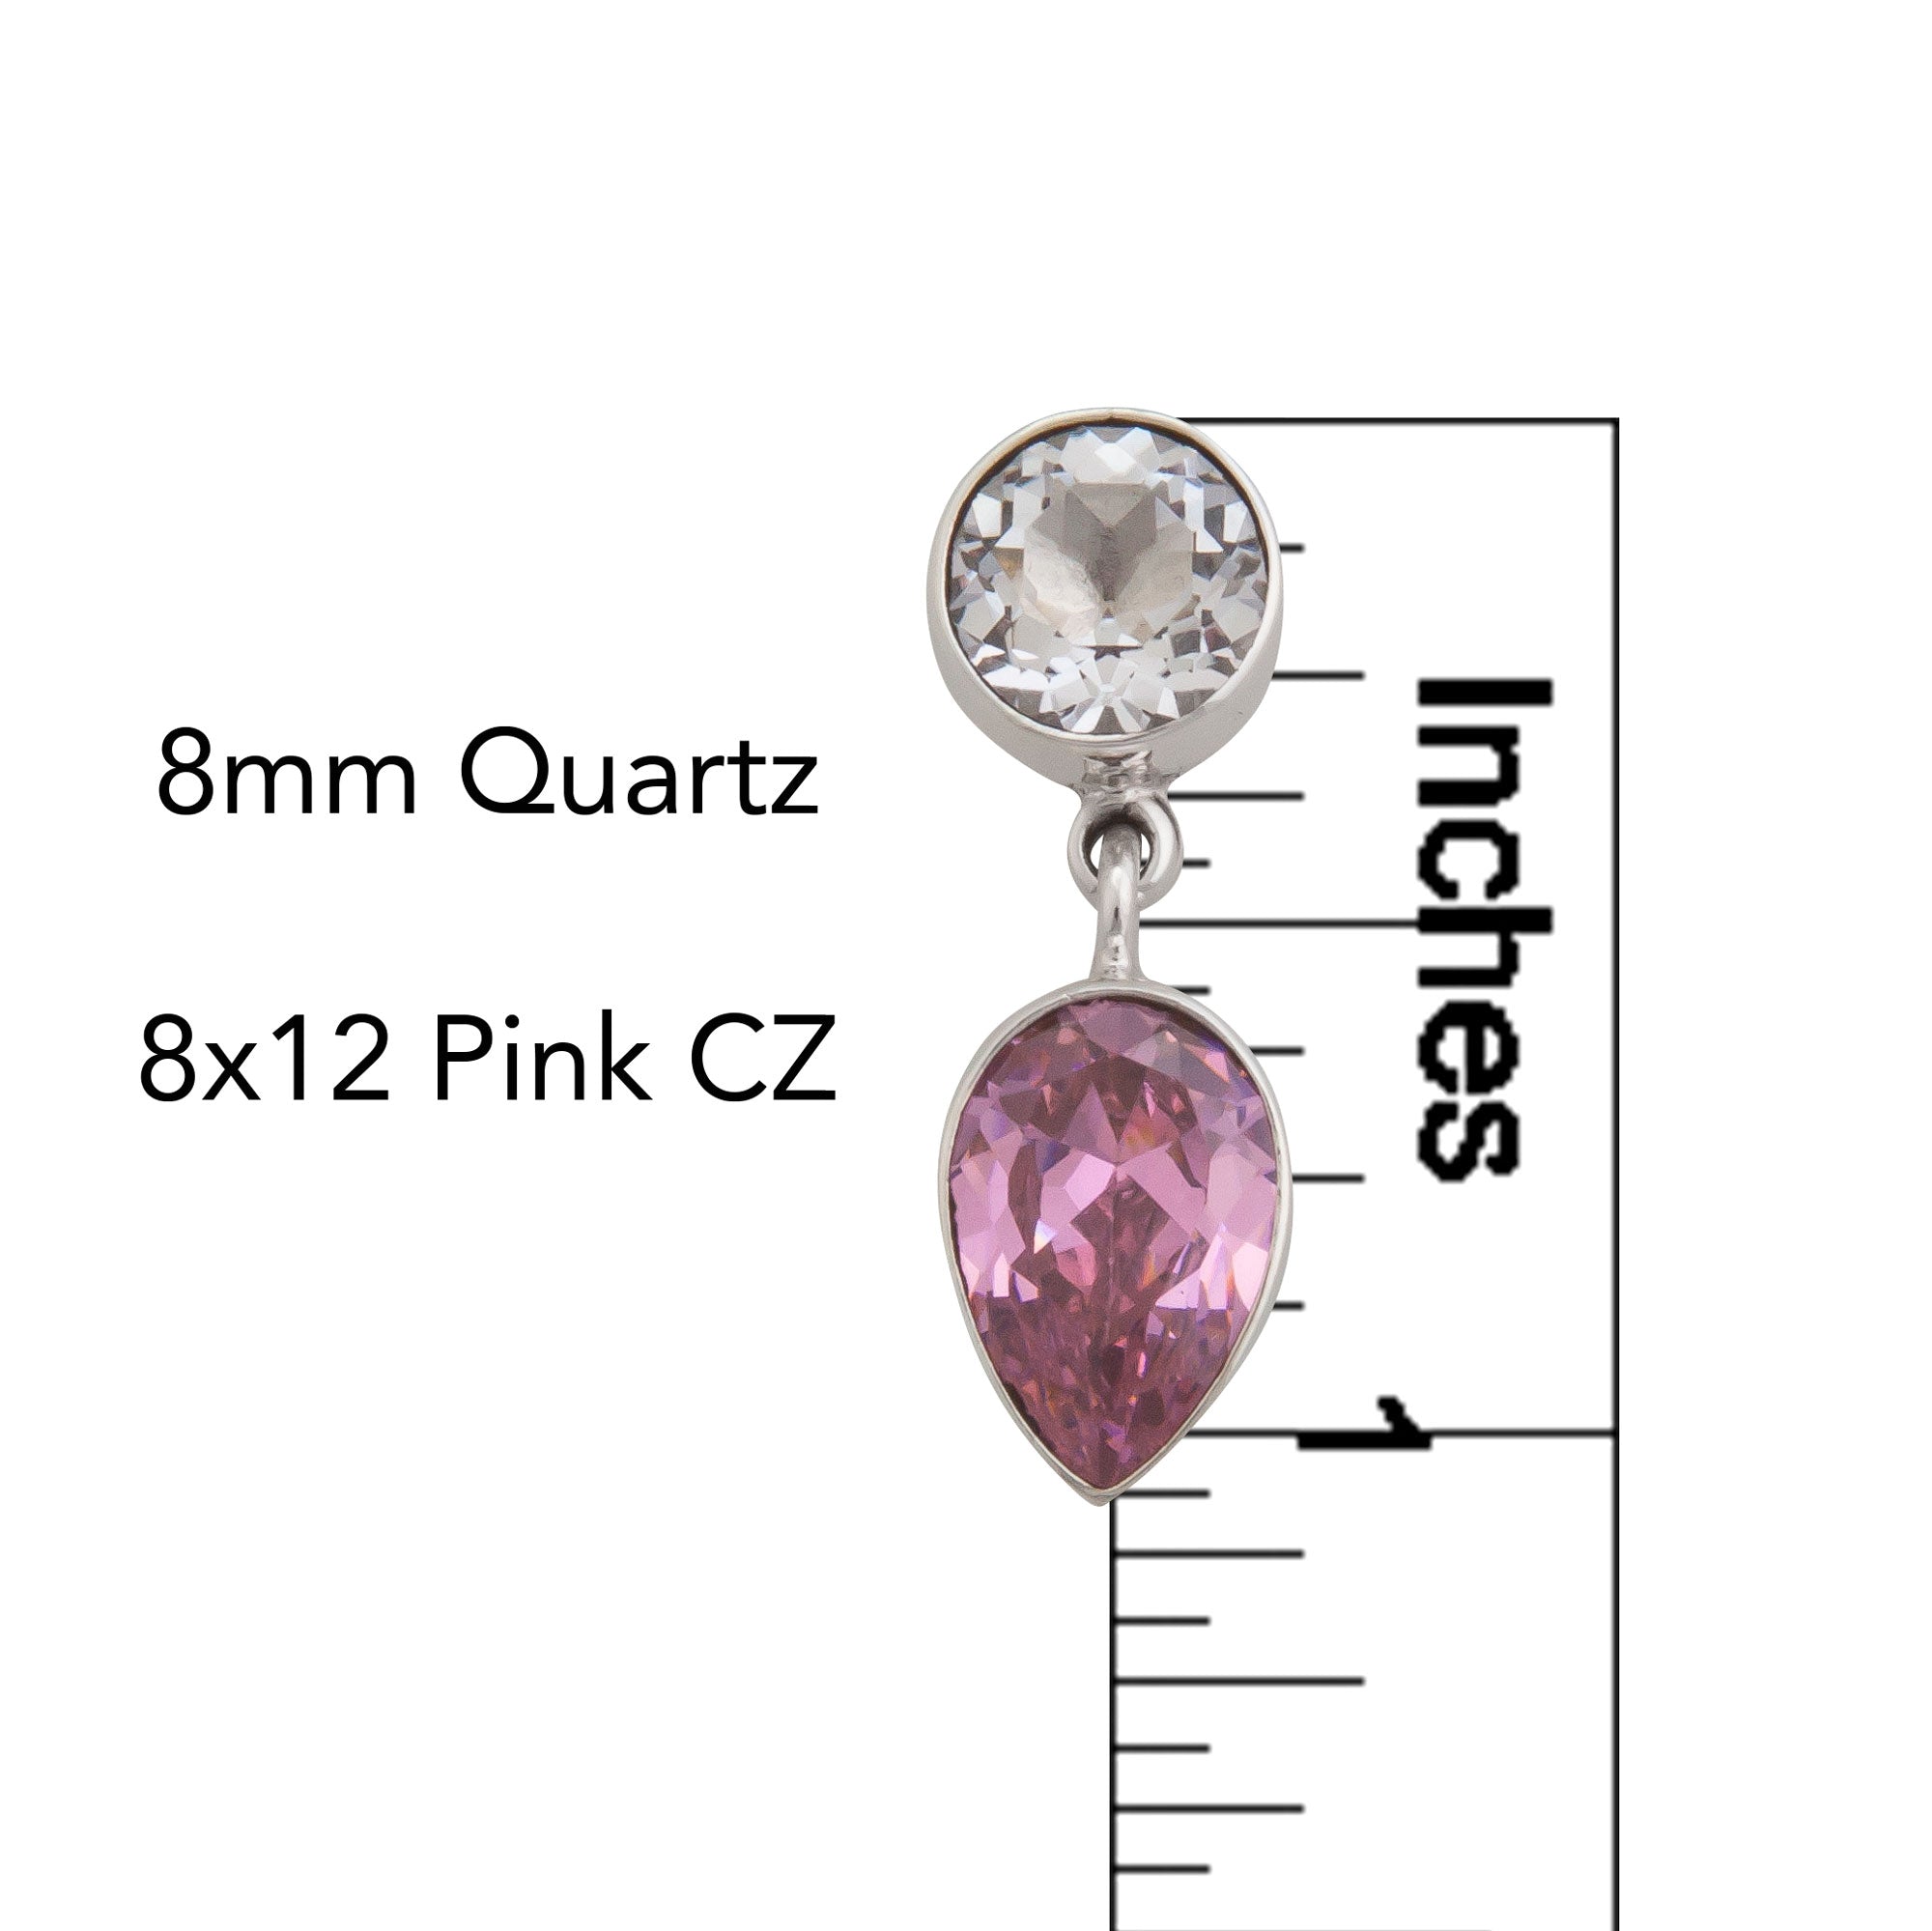 Charles Albert Jewelry - Adore Sterling Silver Quartz and Pink CZ Post Earrings - Measurements